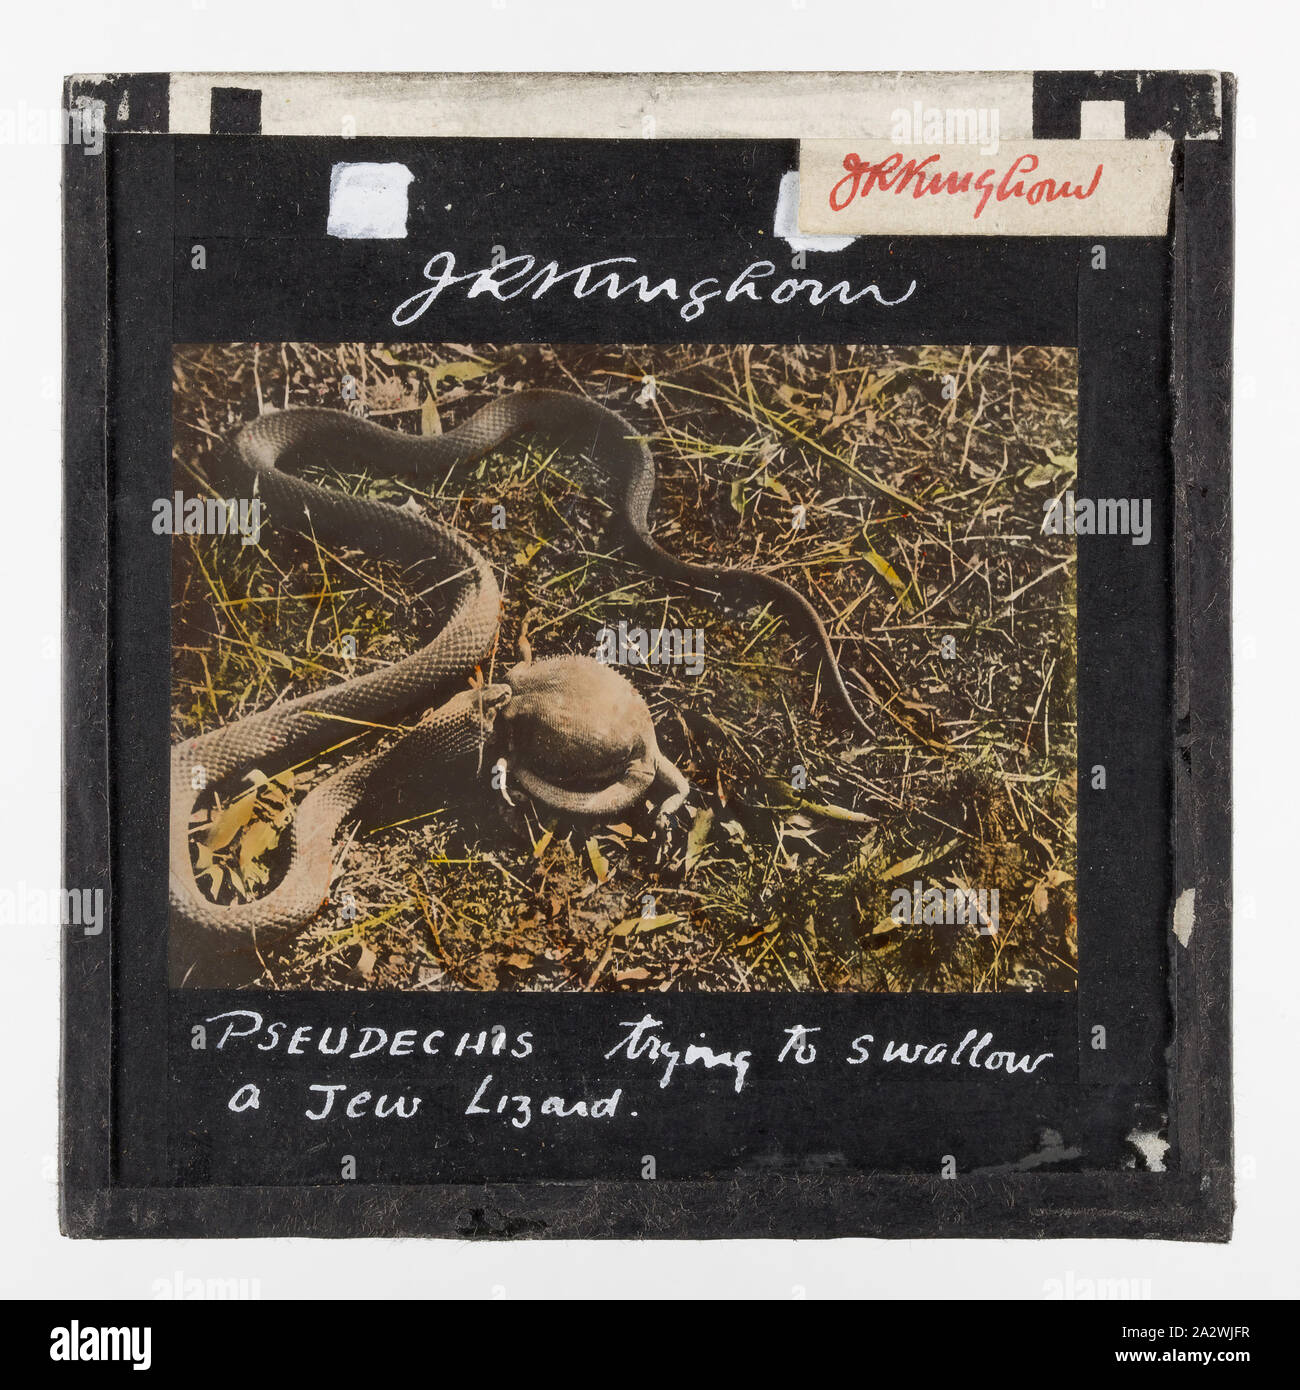 Lantern Slide - Snake Trying to Swallow Jew Lizard, 1920-1940, Coloured lantern slide depicting a pseudechis (king brown snake) trying to swallow a jew lizard. Image by J. R. Kinghorn, (1891-1983), zoologist, museum curator and broadcaster. Kinghorn was employed at the Australian Museum in Sydney between 1907-1956 Stock Photo